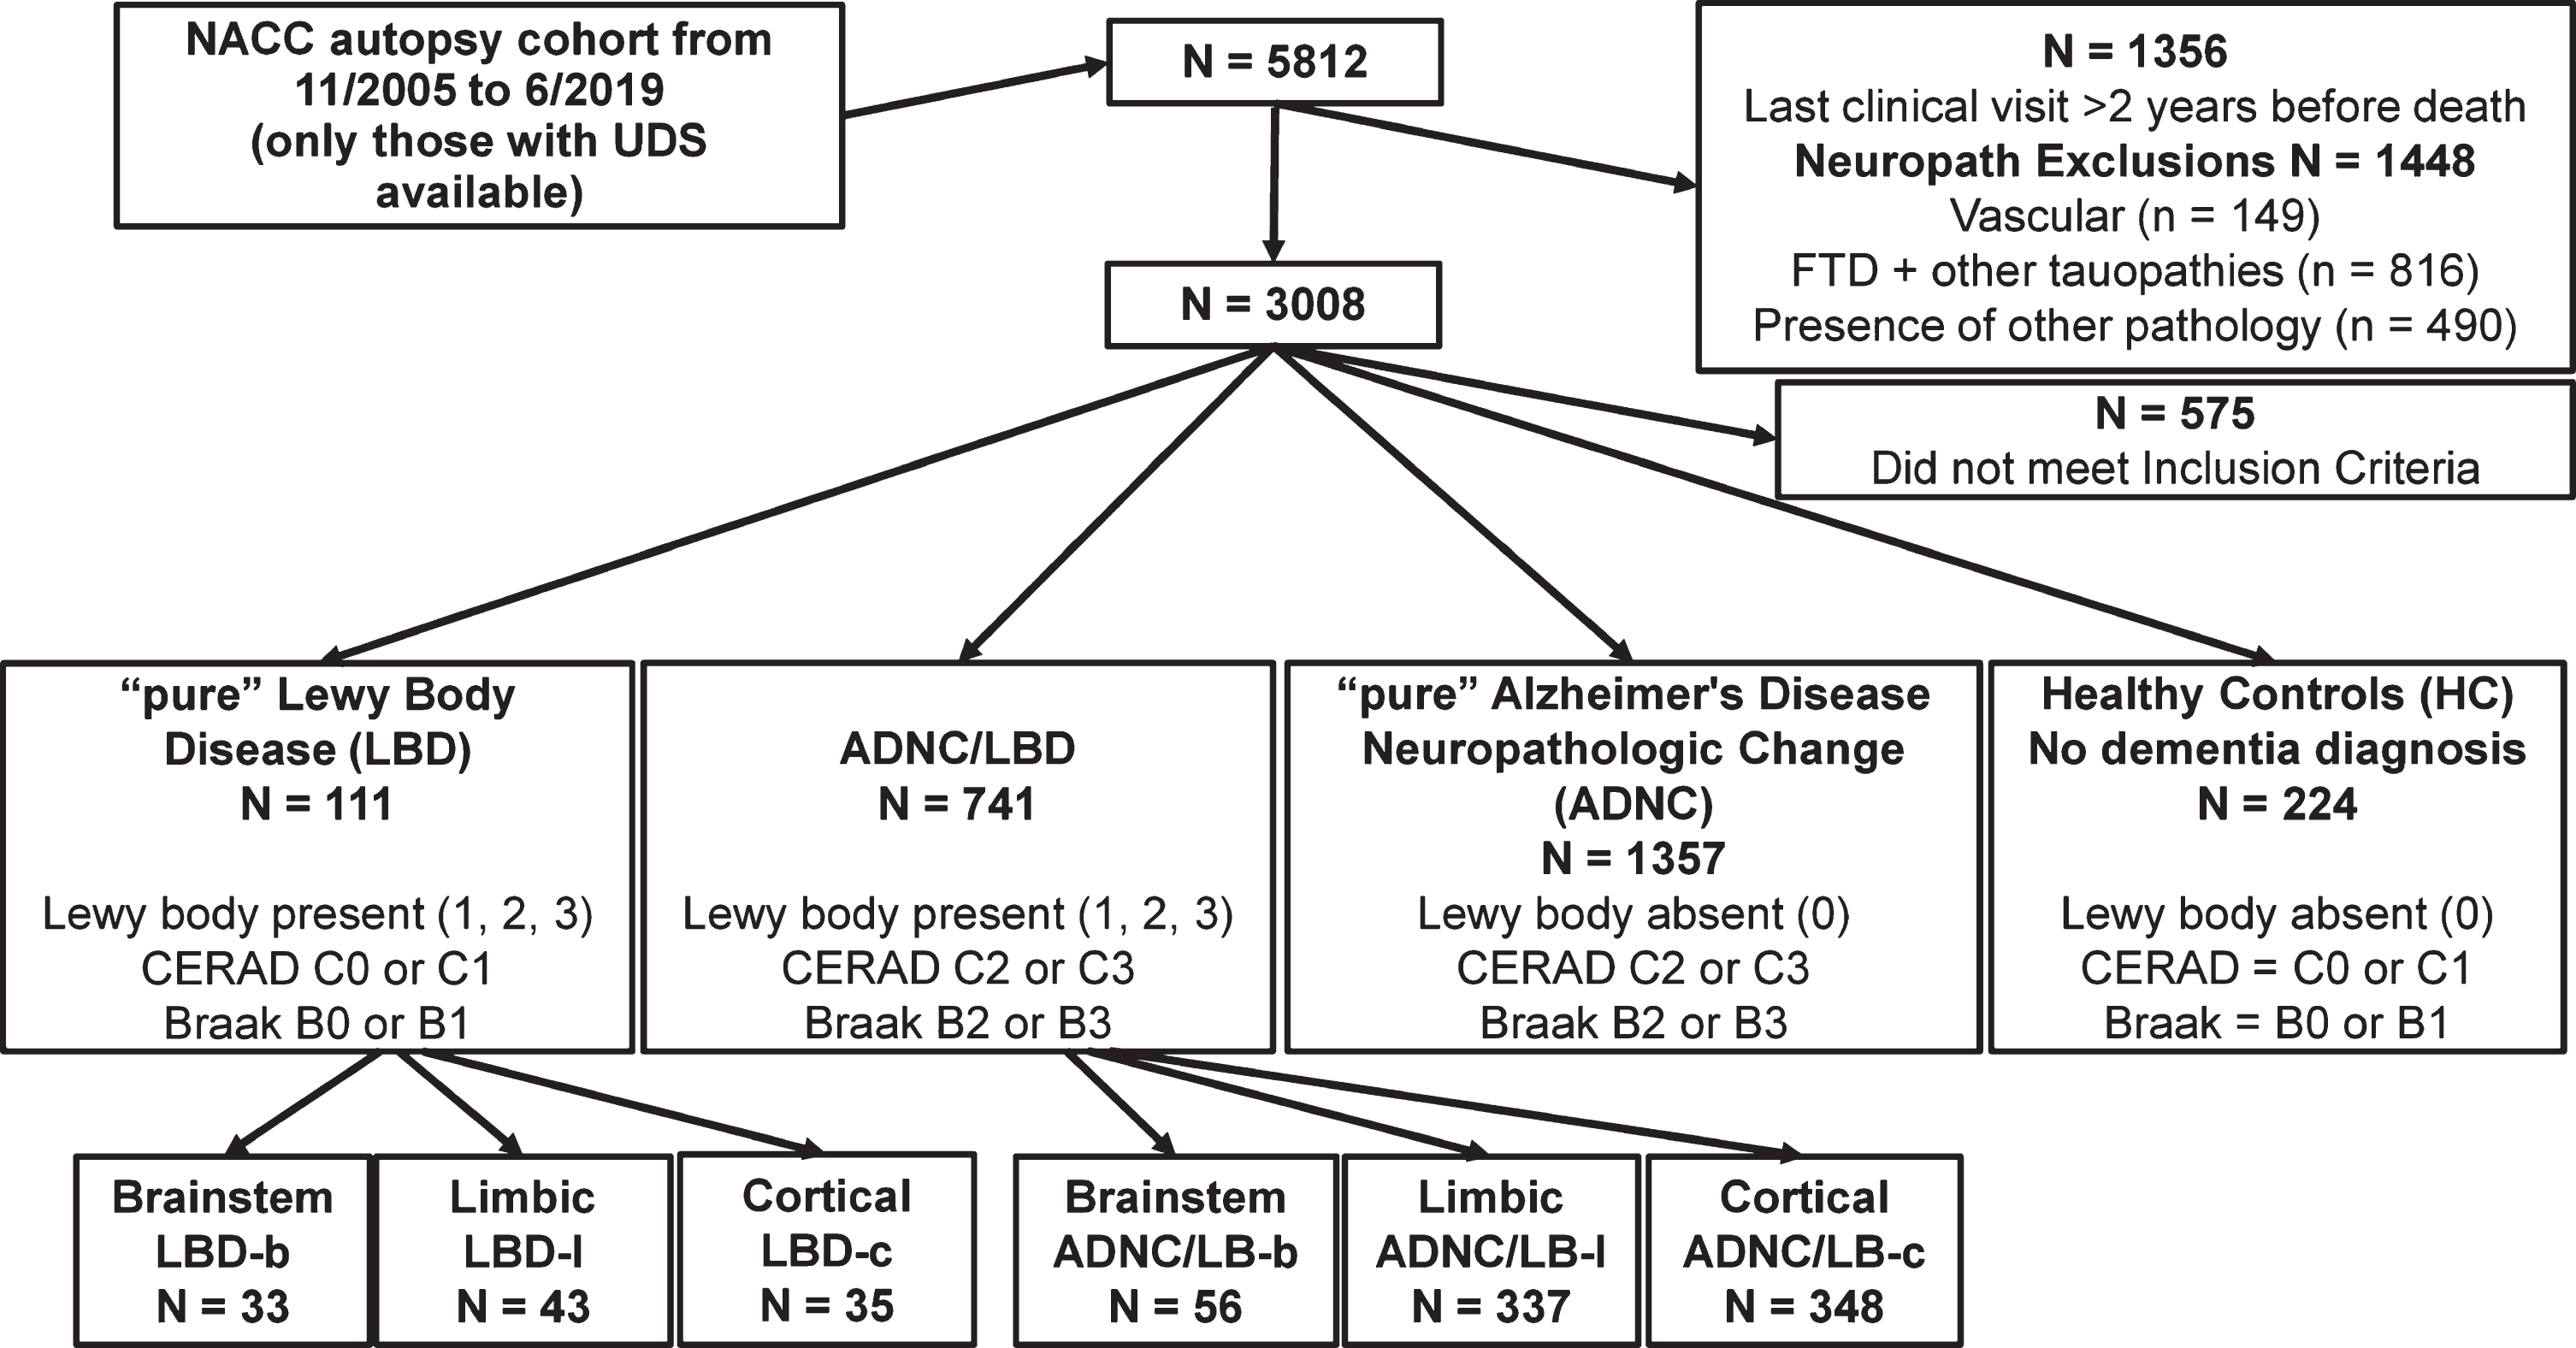 Flow Diagram of Exclusion Criteria. “Pure” Lewy body disease pathology (LBD) groups exhibited low Alzheimer’s disease neuropathologic change (ADNC). Low ADNC includes Neuritic plaque score (CERAD[26]) equivalent to C0 or C1, and Braak Neurofibrillary Tangle Score (Braak Stage; equivalent to B0 or B1 [27]). LBD groups were further delineated into brainstem (LBD-b; most commonly observed in the substantia nigra or locus coeruleus), limbic (LBD-l; cingulate, entorhinal, amygdala), and cerebral cortical (LBD-c) groups. Combined pathology groups (ADNC/LBD) exhibited intermediate or high ADNC and the presence of Lewy body neuropathology and were further delineated into brainstem (ADNC/LBD-b), limbic (ADNC/LBD-l), and cerebral cortical (ADNC/LBD-c) groups. “Pure” ADNC exhibited intermediate or high ADNC and no LBD. Healthy controls (HC) exhibited low ADNC and no LBD and no diagnosis of dementia at any evaluation. NACC, National Alzheimer’s Coordinating Center; UDS, Uniform Data Set; FTD, frontotemporal dementia; CERAD, Consortium to Establish a Registry for Alzheimer’s disease criteria.